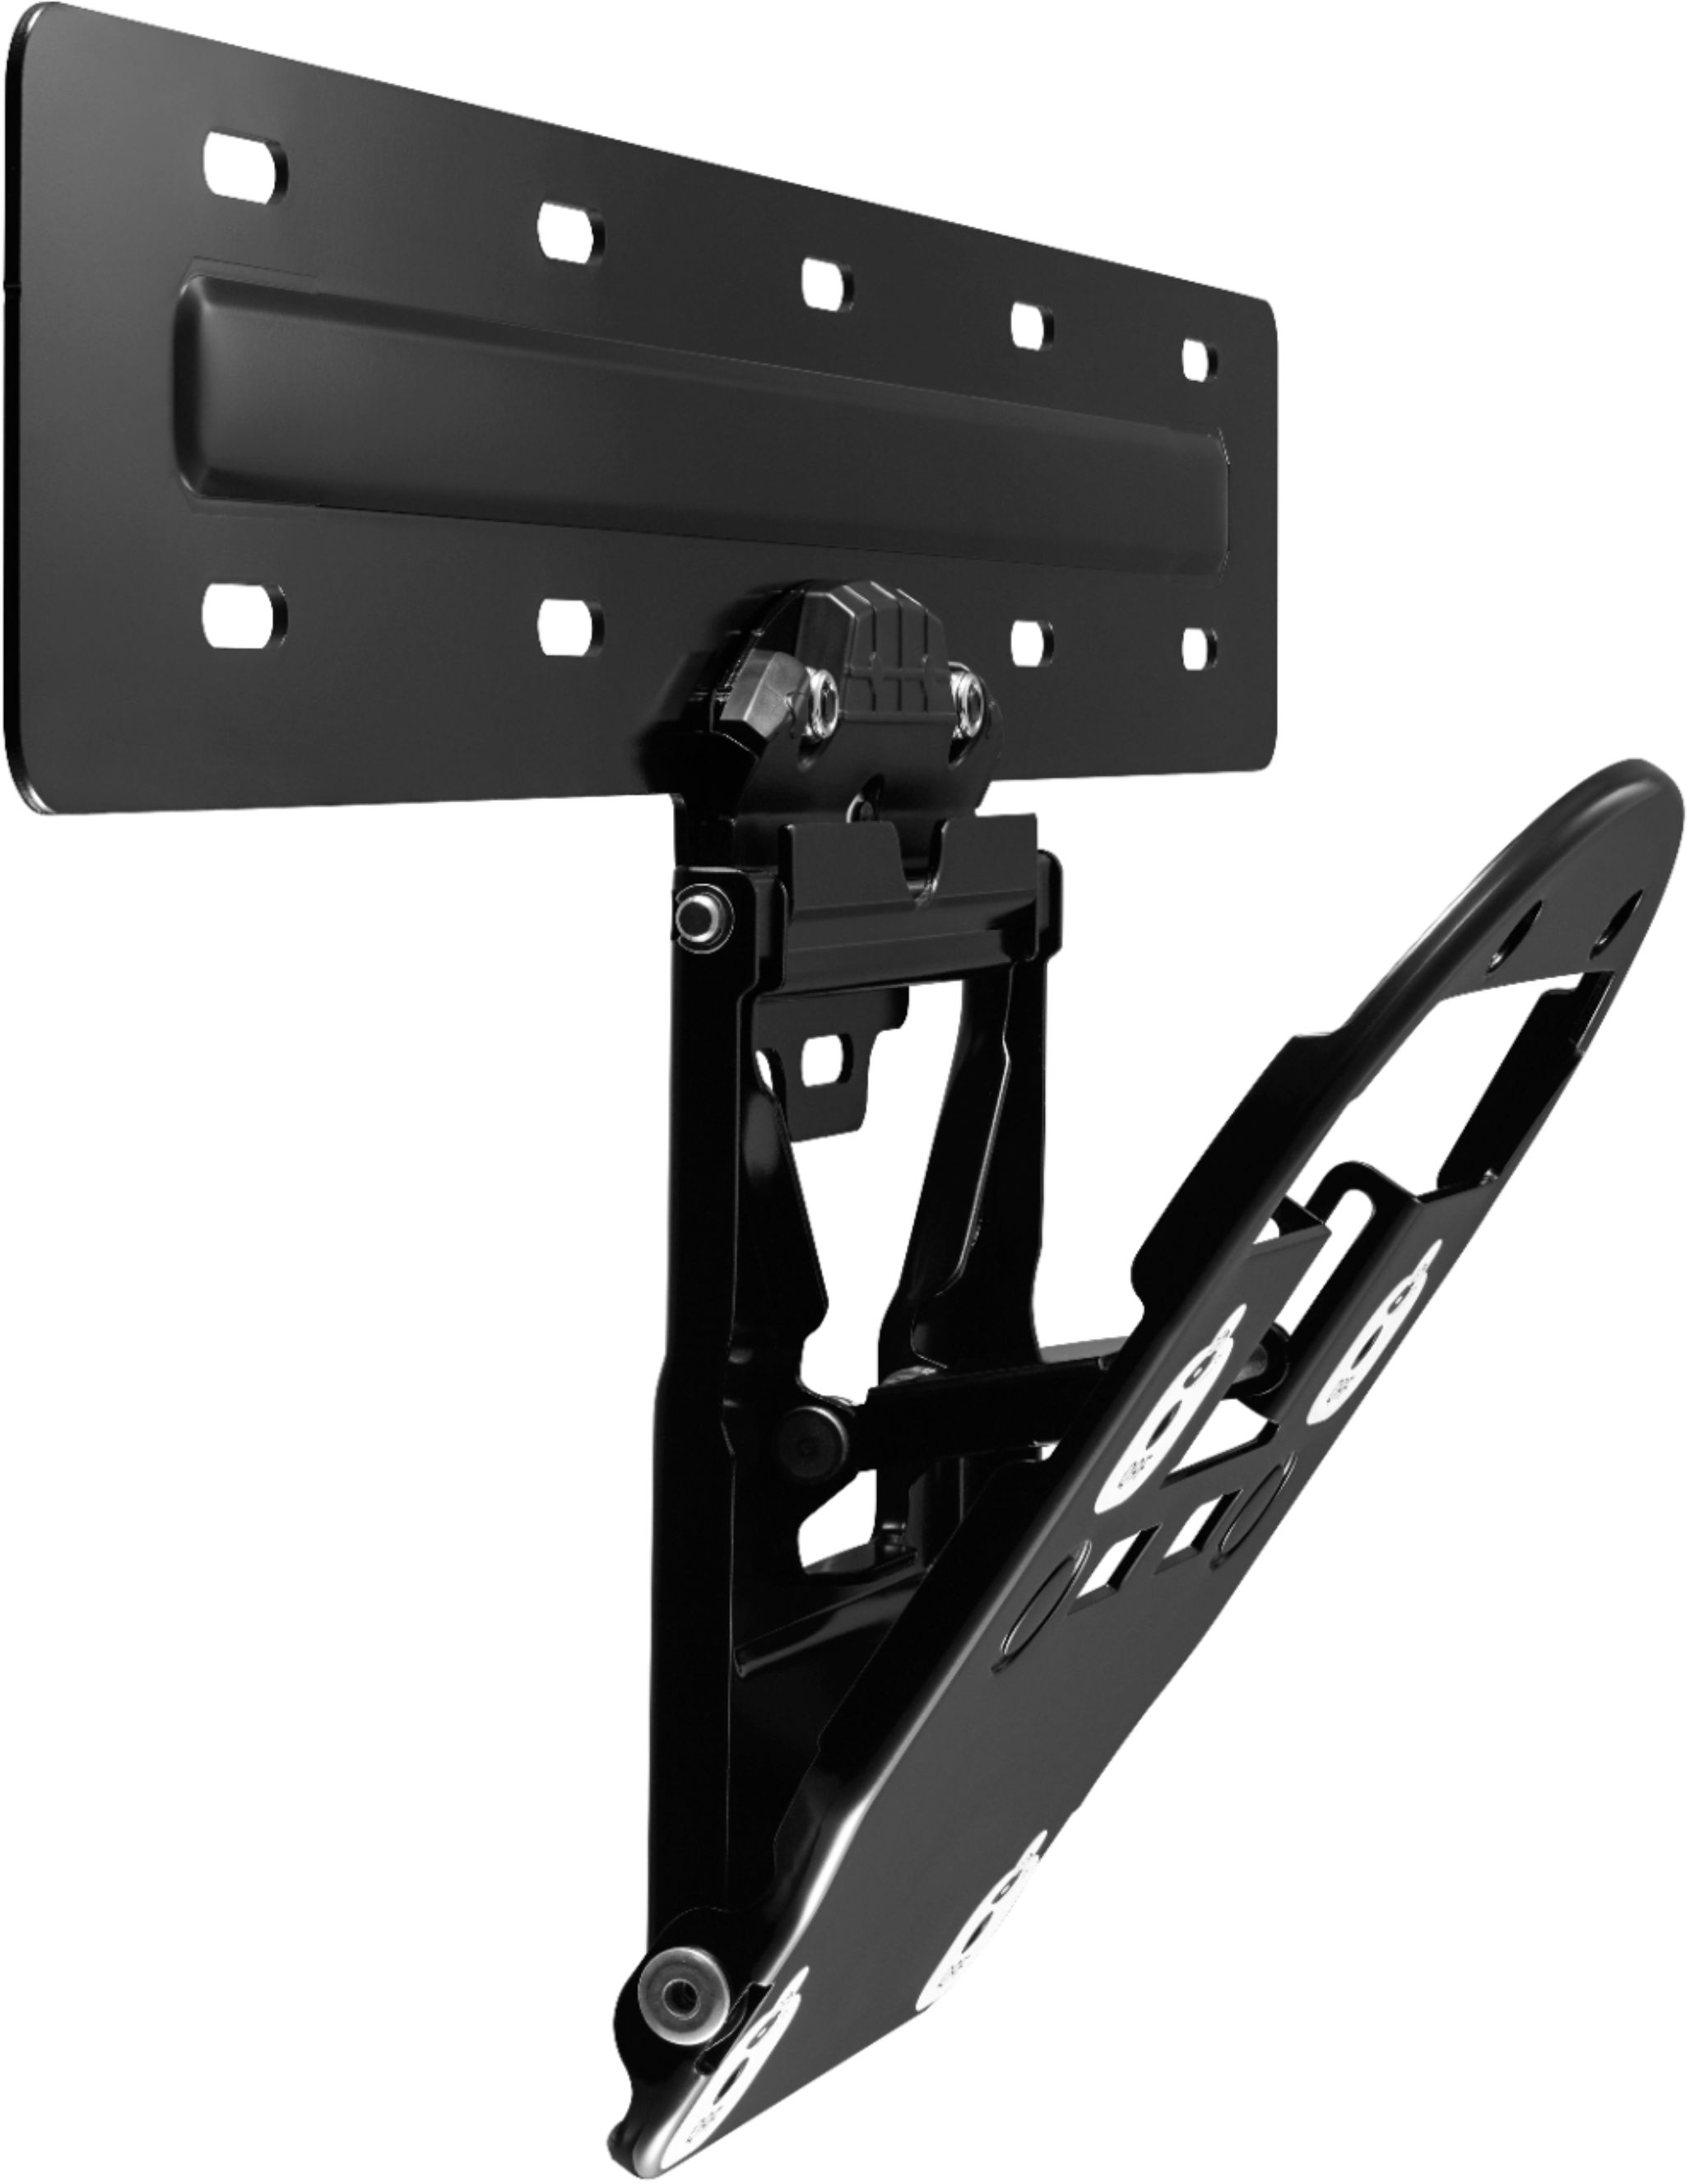 Samsung No Gap Tilting TV Wall Mount for Most 55" and 65" TVs Black WMN